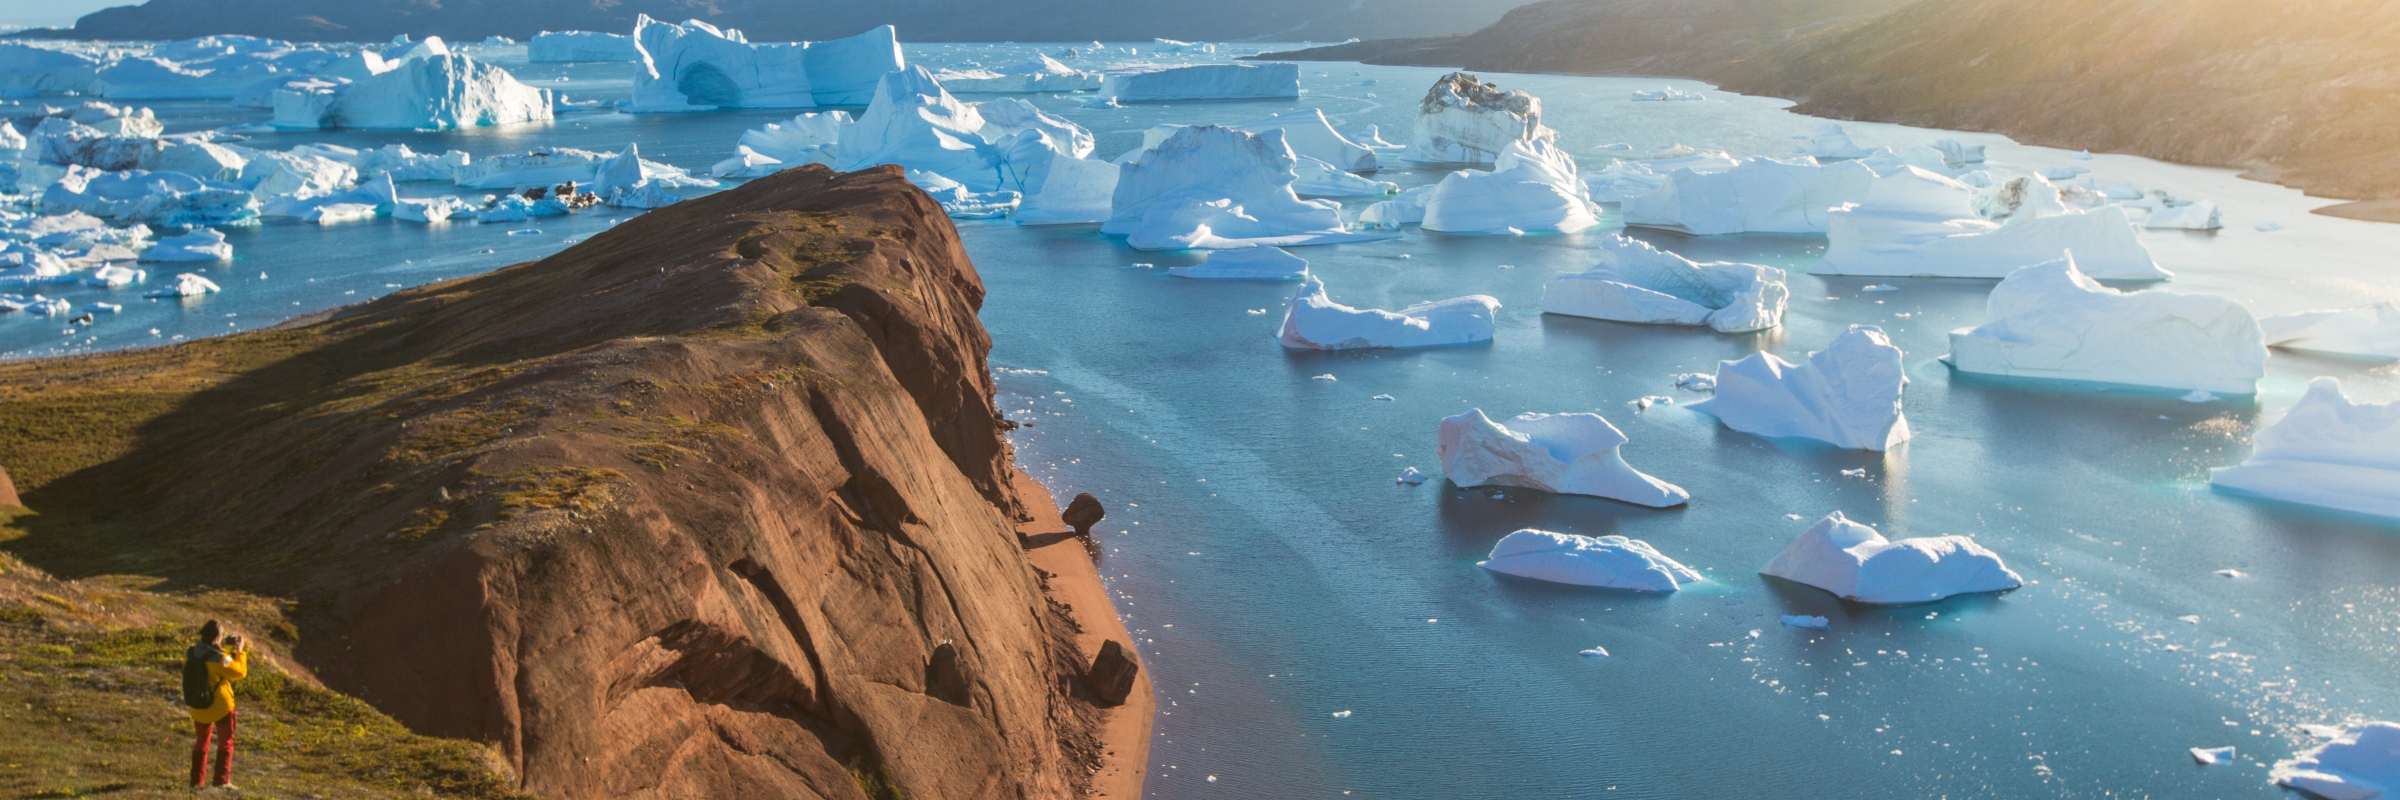 Explore the remote coast of East Greenland and Scoresbysund